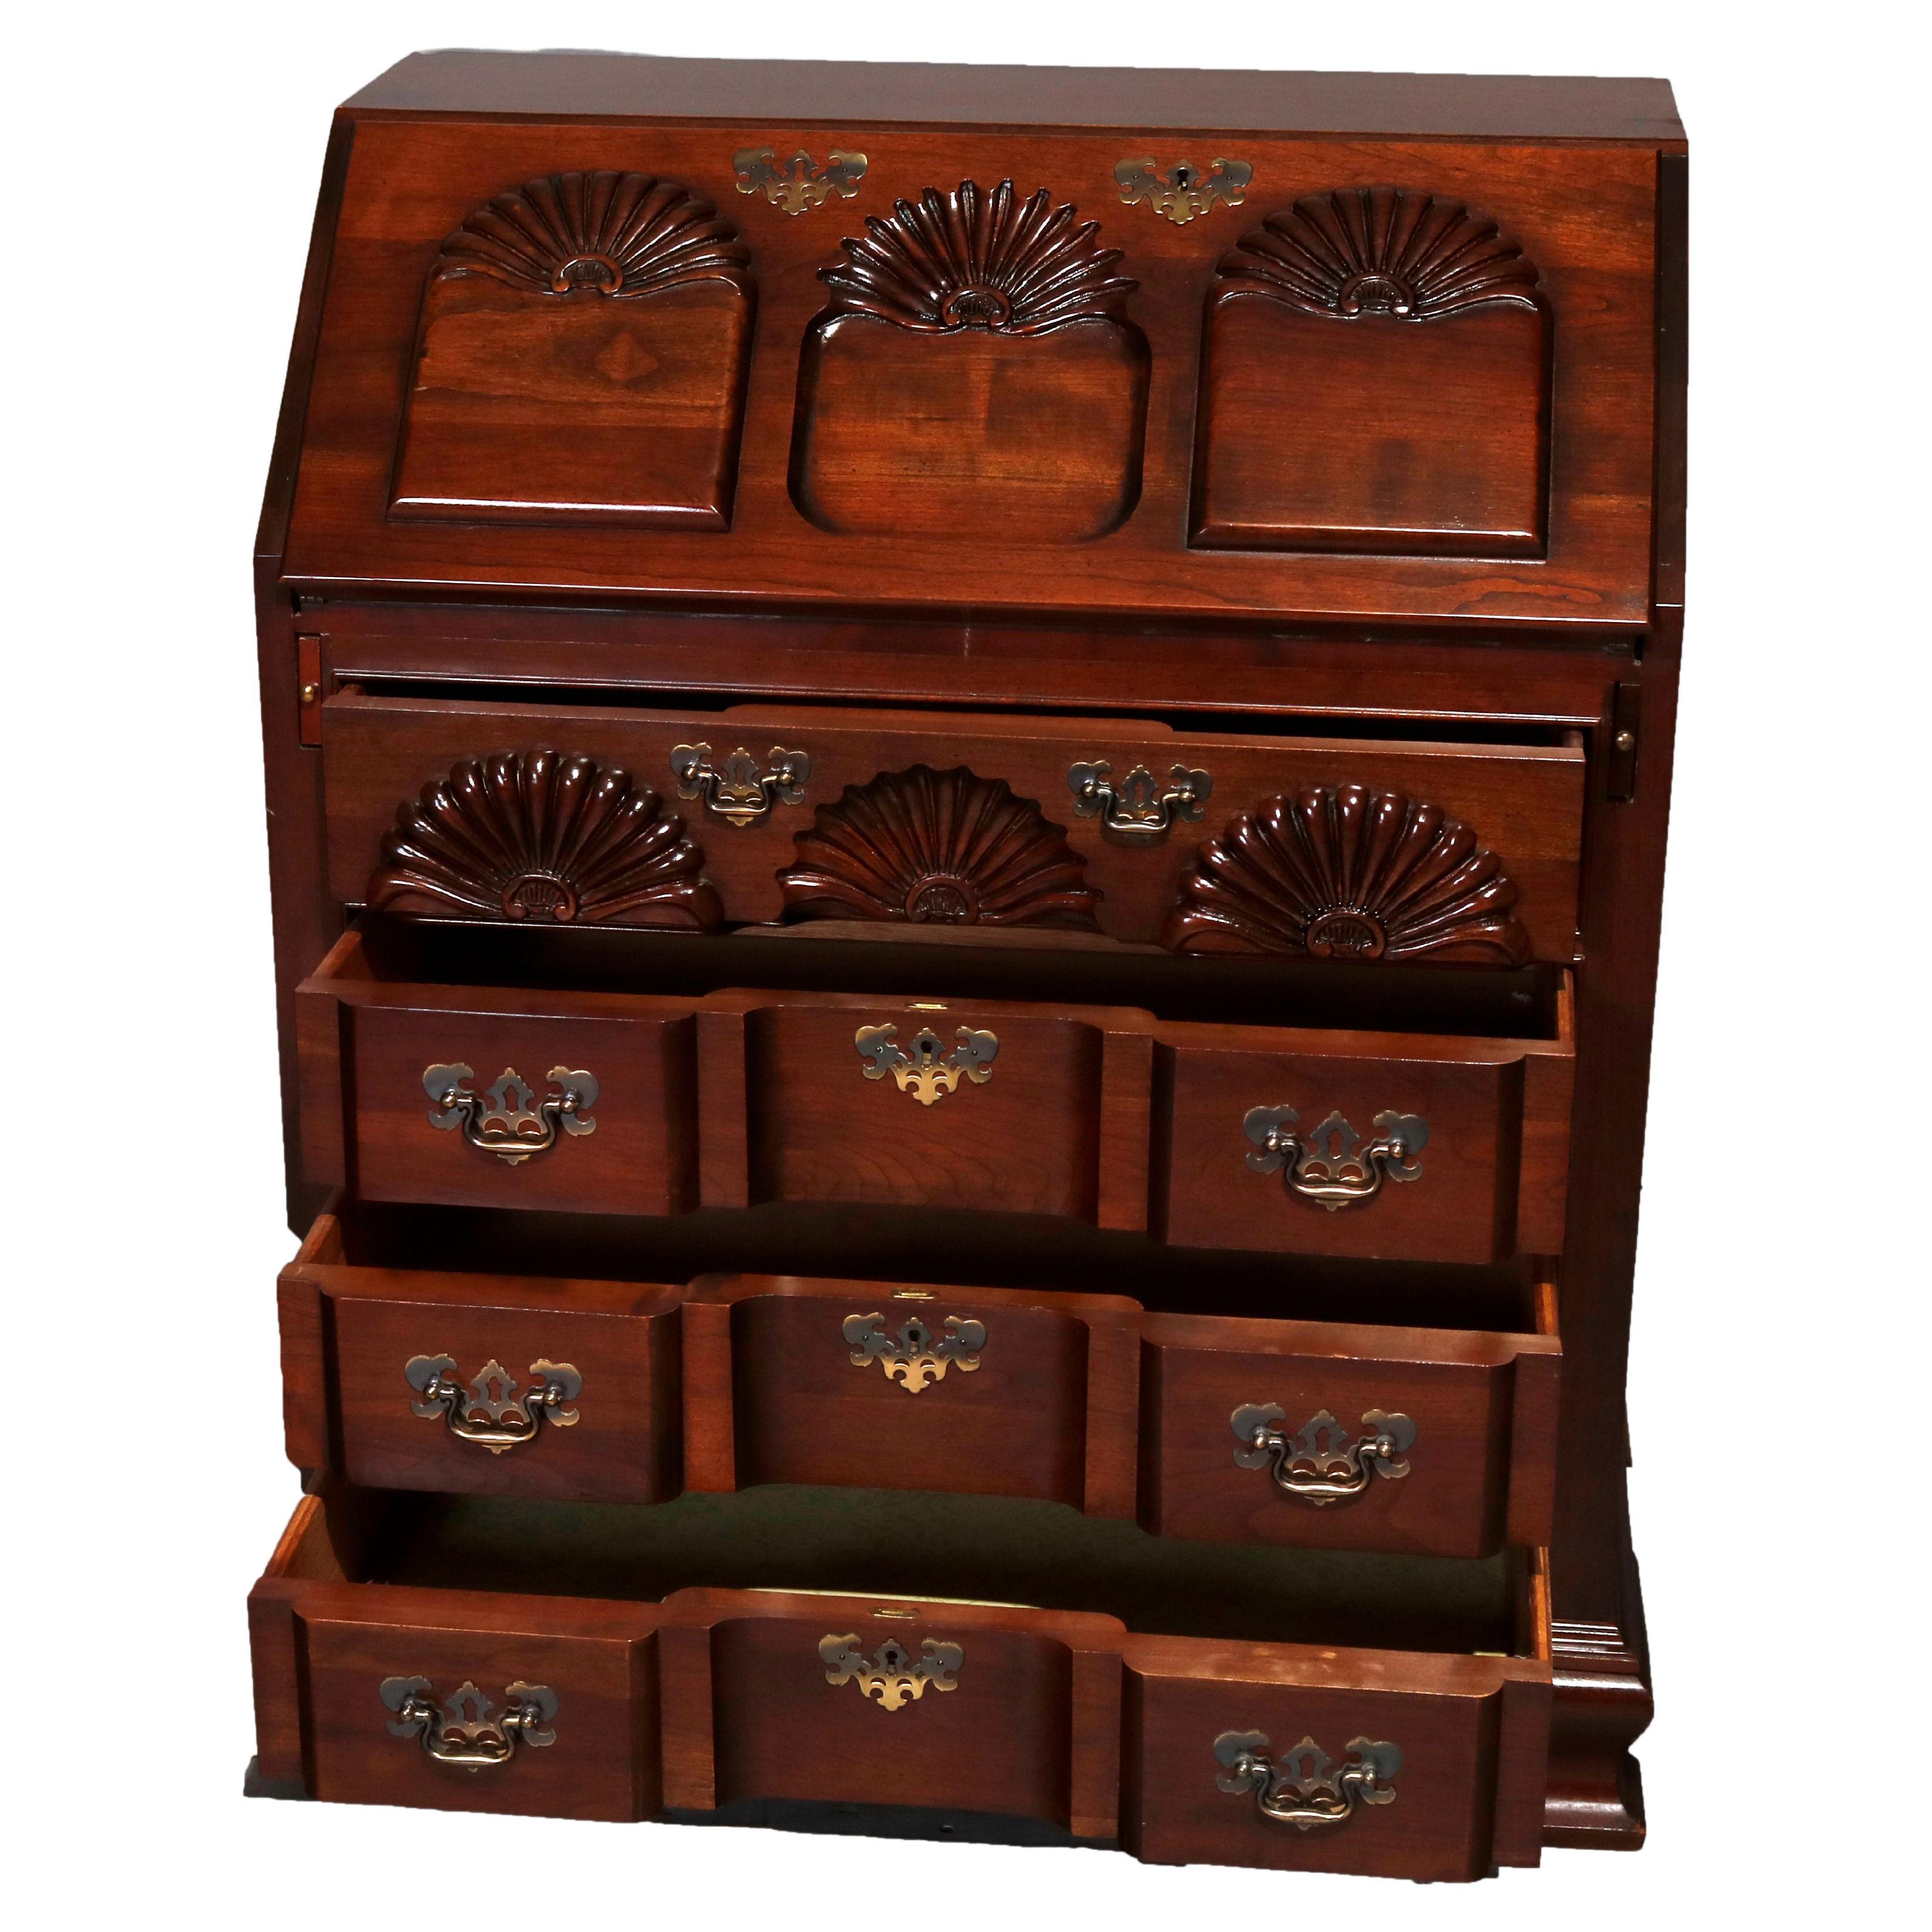 A Chippendale style desk offers cherry construction with drop front over block case having four drawers, shell carved reserves throughout, raised on bracket feet, 20th century

Measures - 37.5